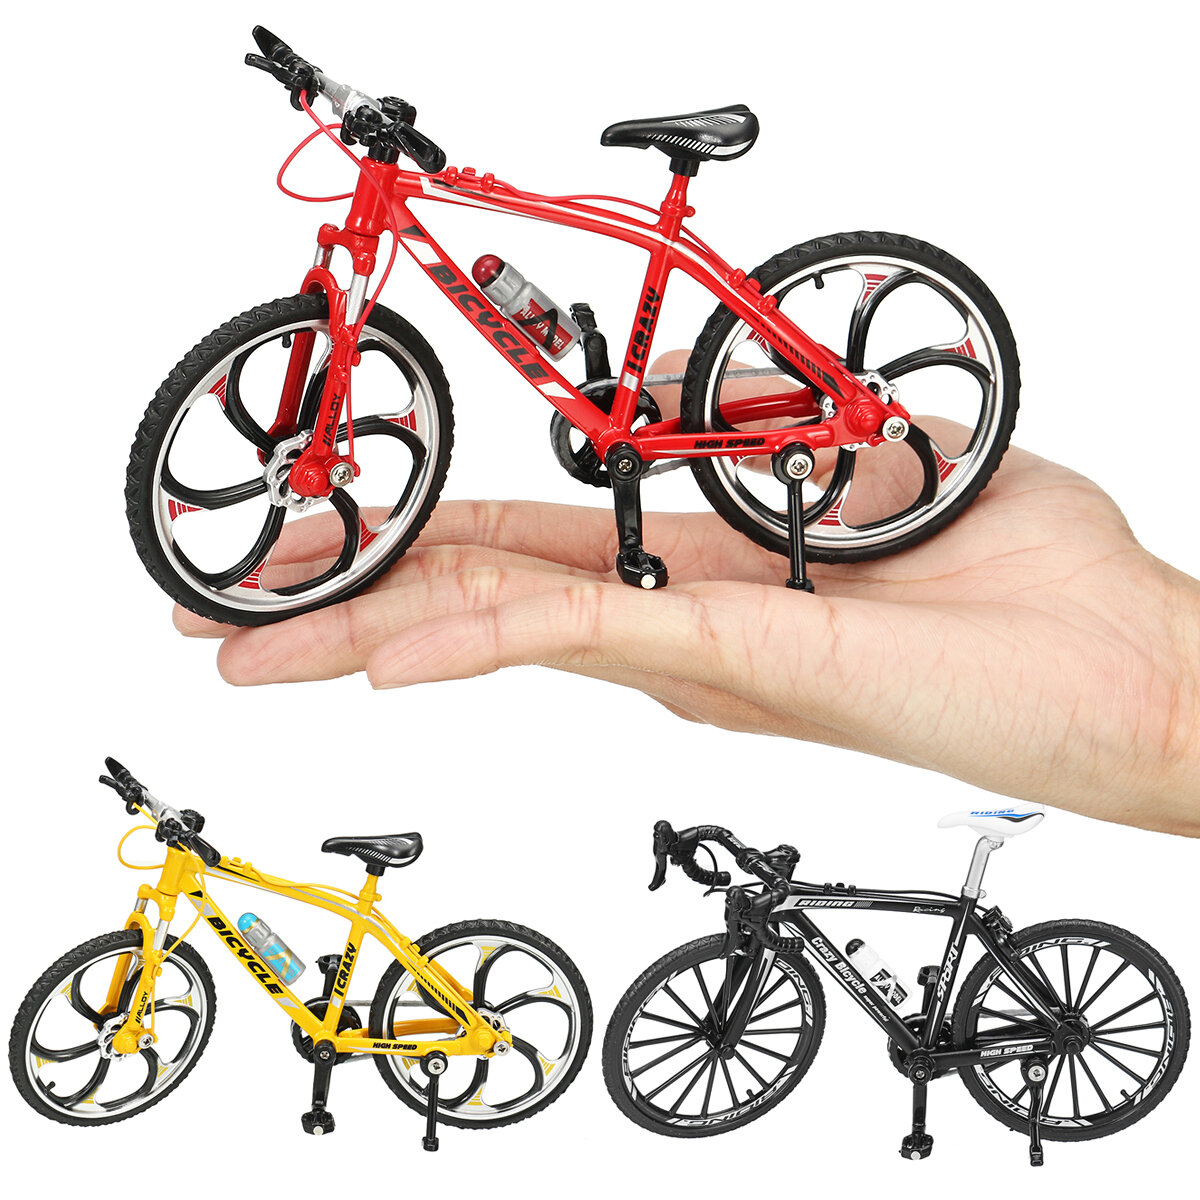 diecast model bicycles